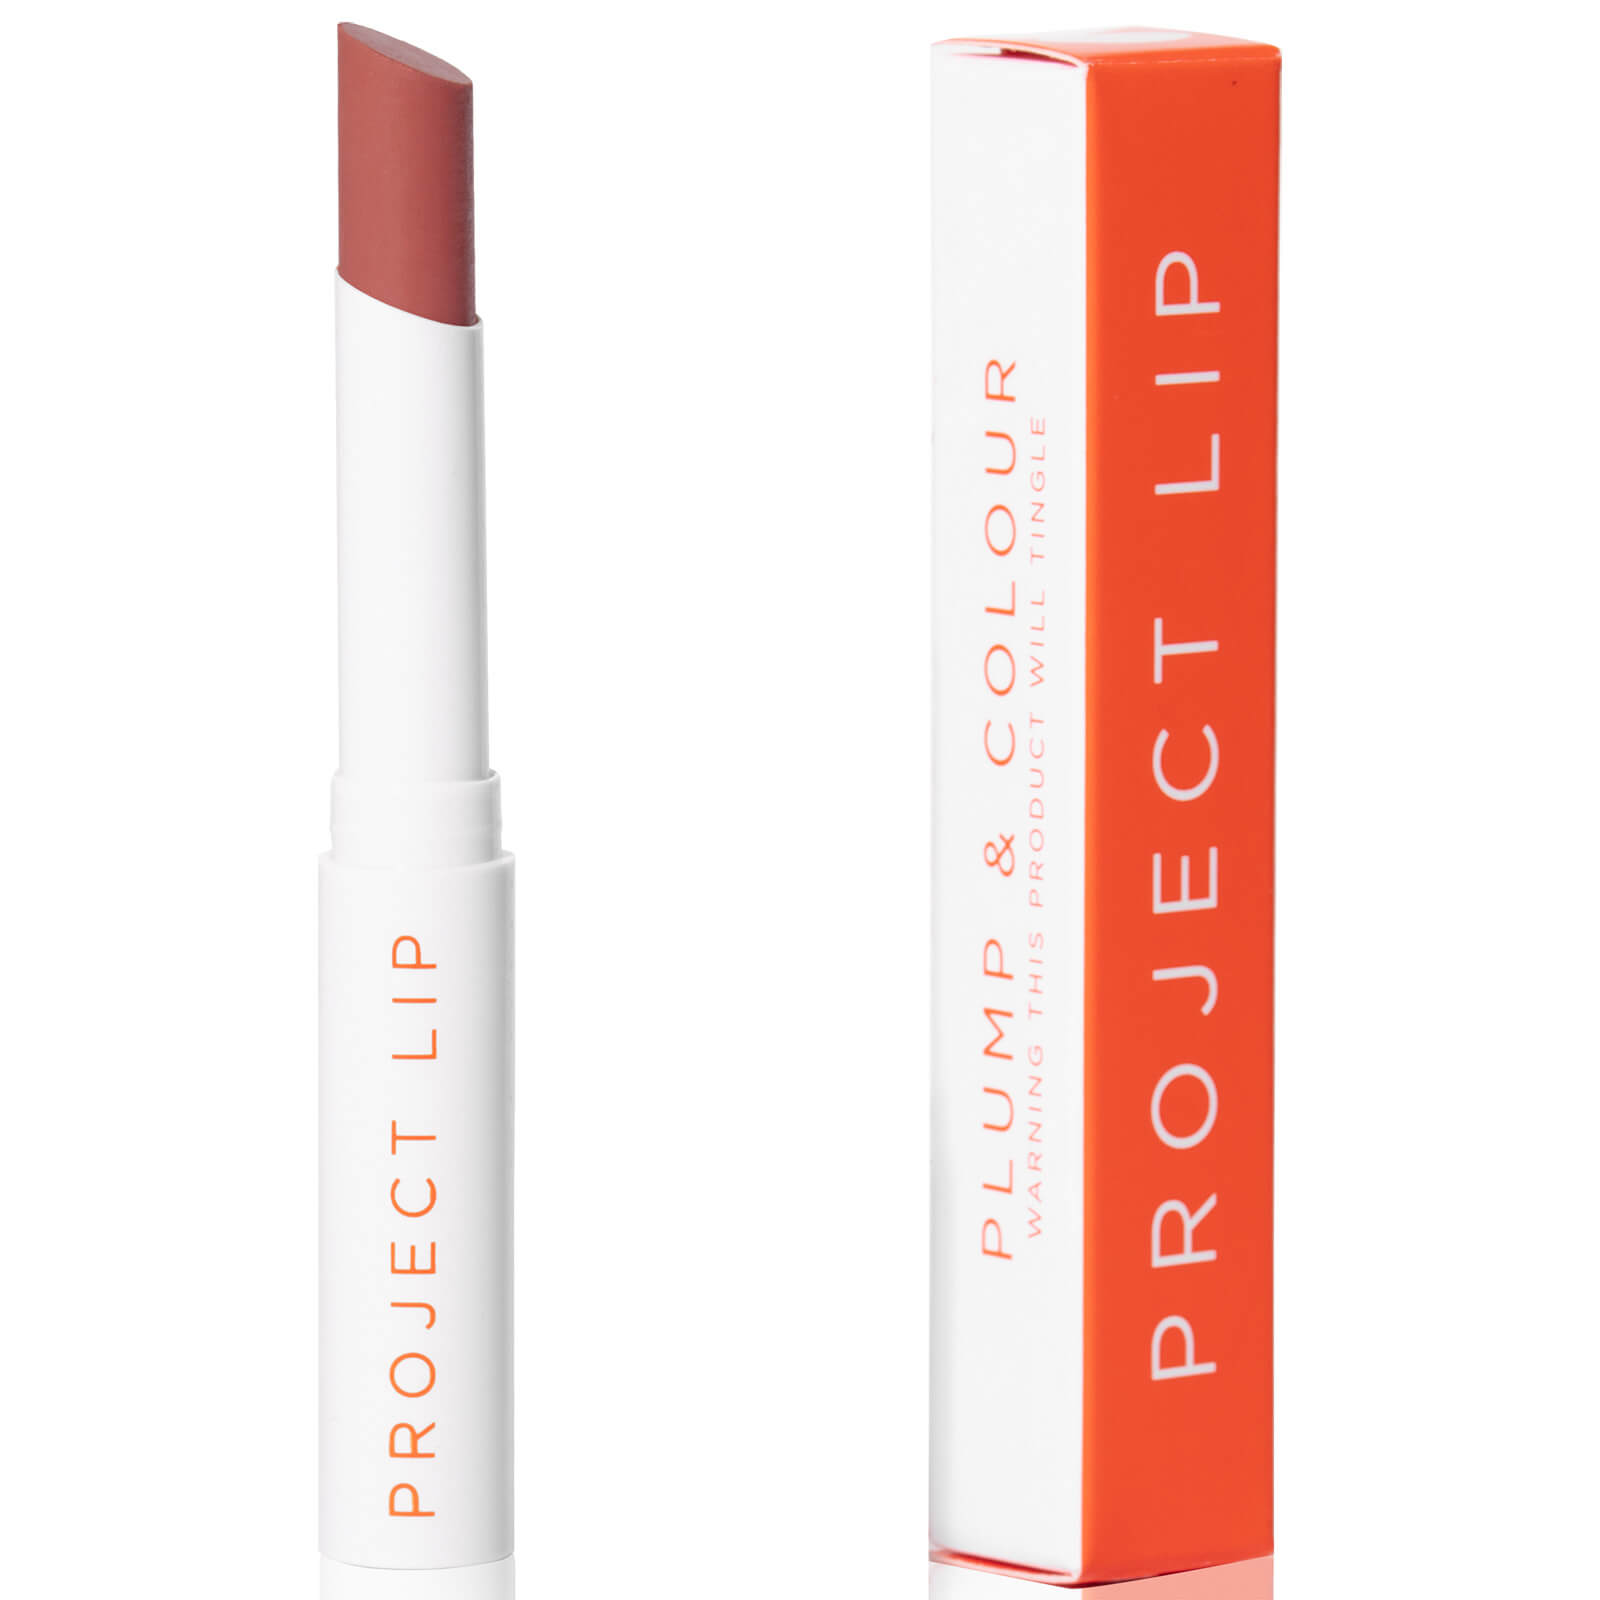 Project Lip Plump and Colour 2g (Various Shades) - Dare